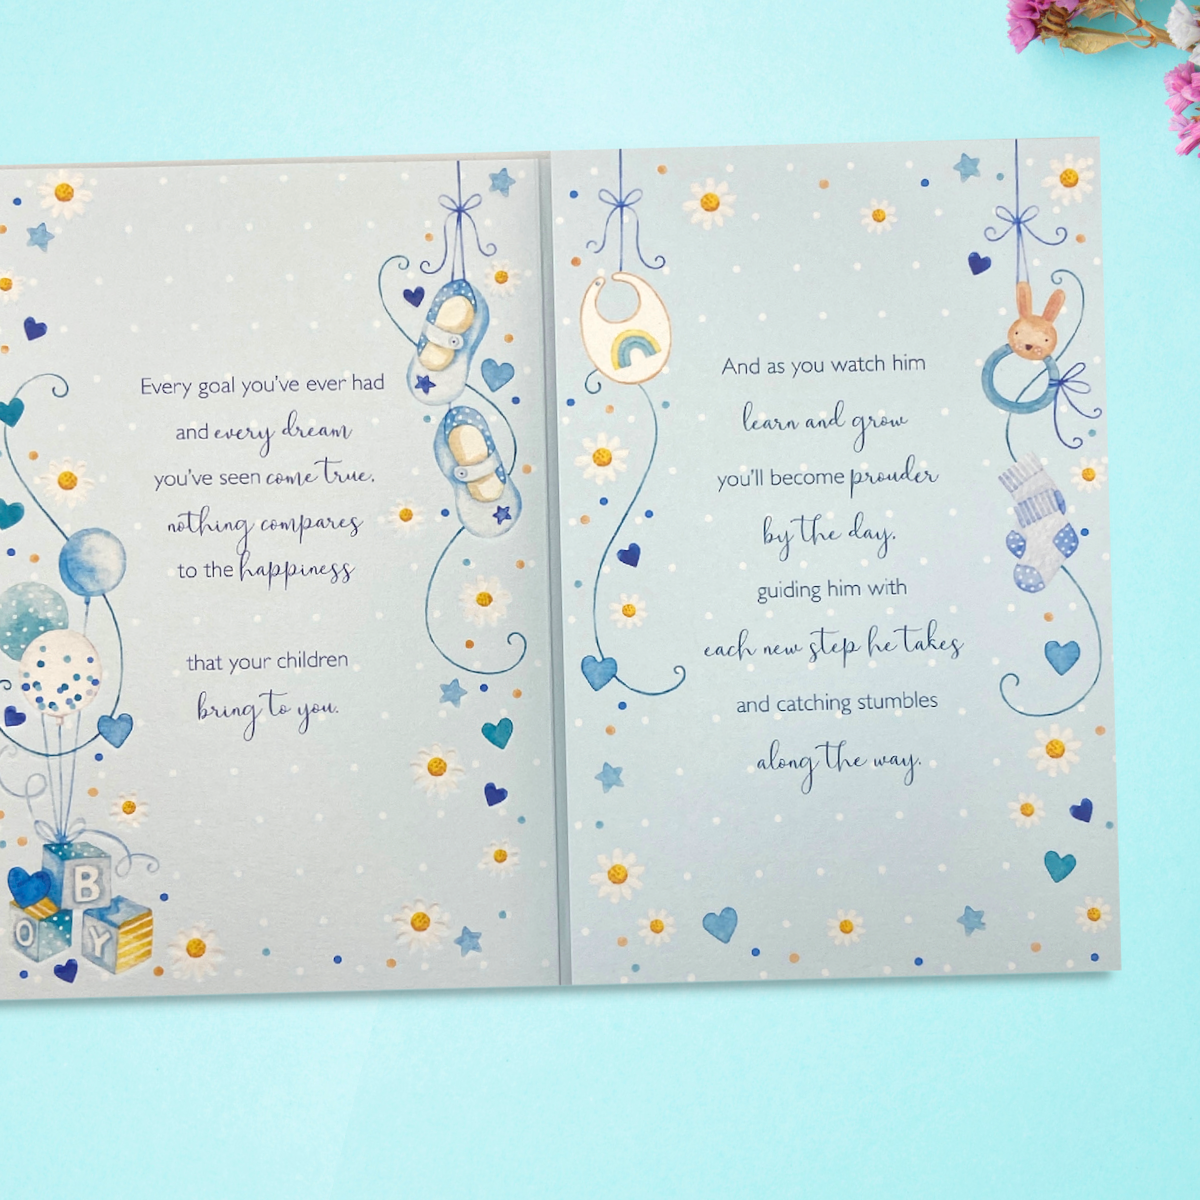 Inside image with two pages of decorated card, and heartfelt verse